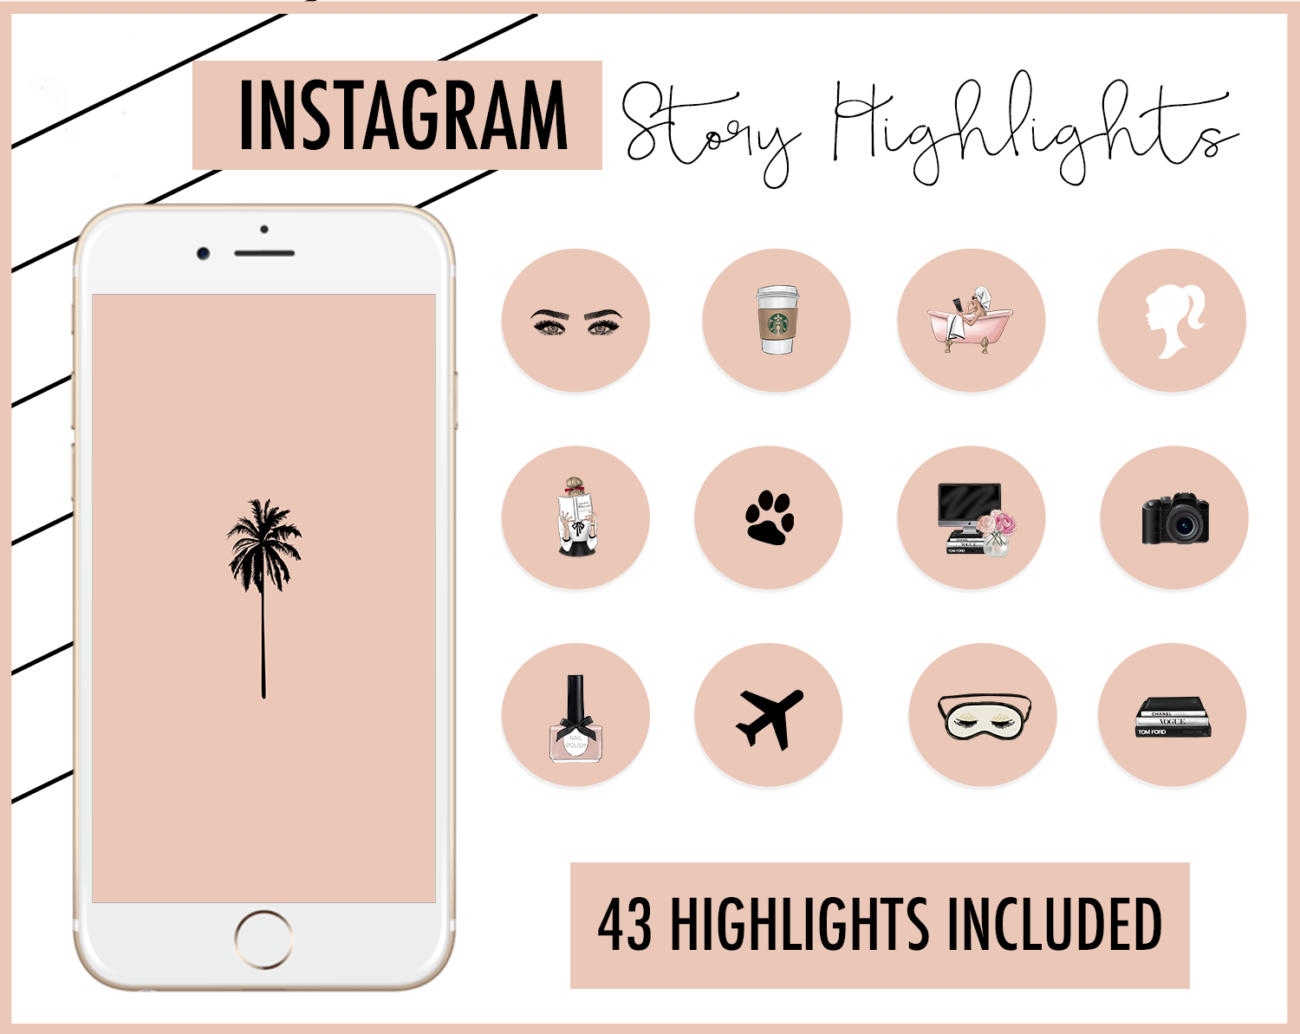 Instagram Story Highlights | Peachy Pink Instagram | Instagram Tips | Instagram Design | Blondie in the City by Hayley Larue